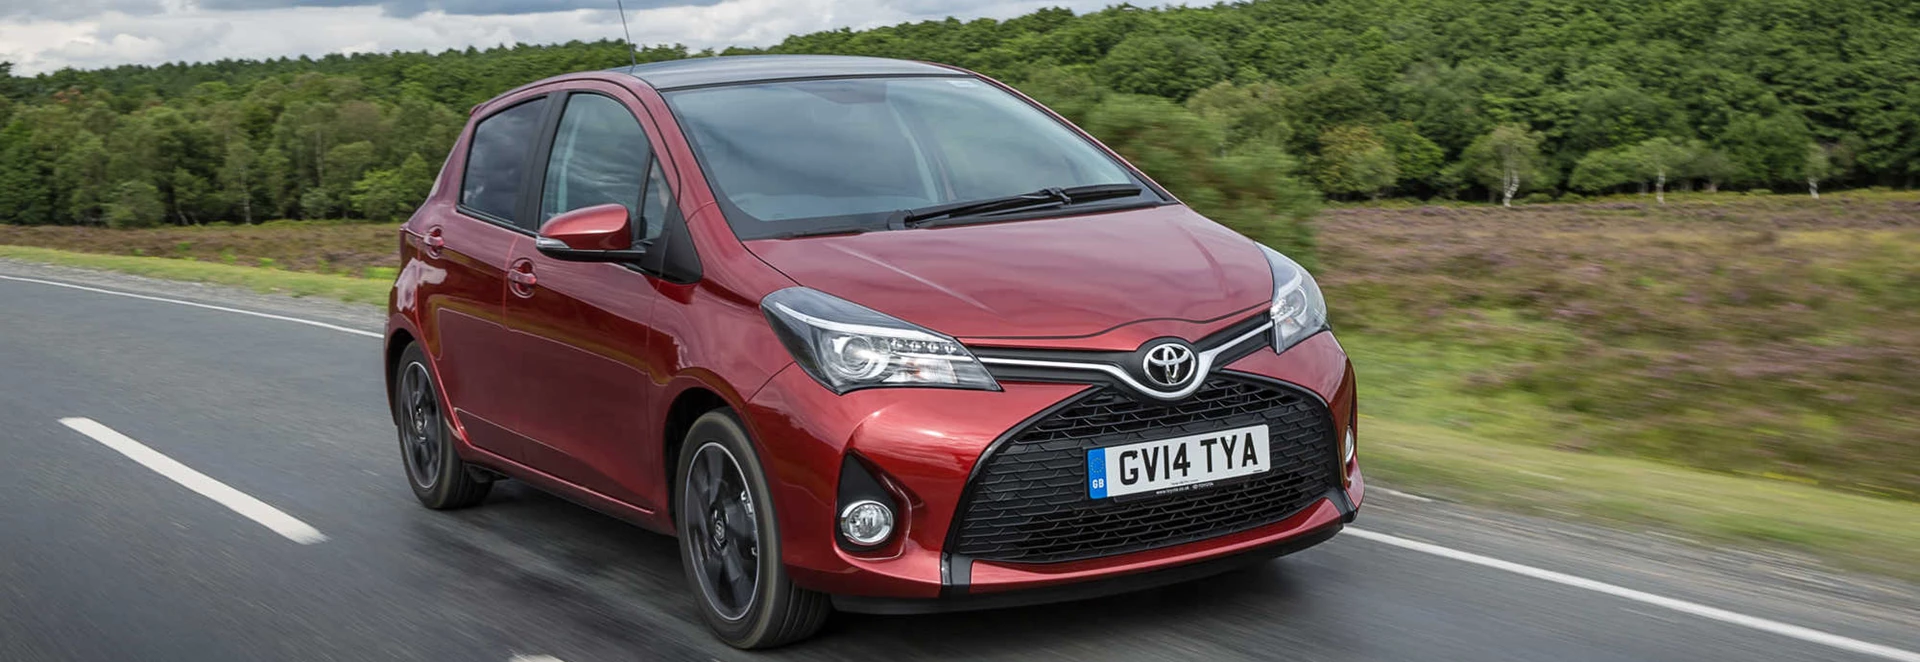 Toyota Yaris hatchback review 